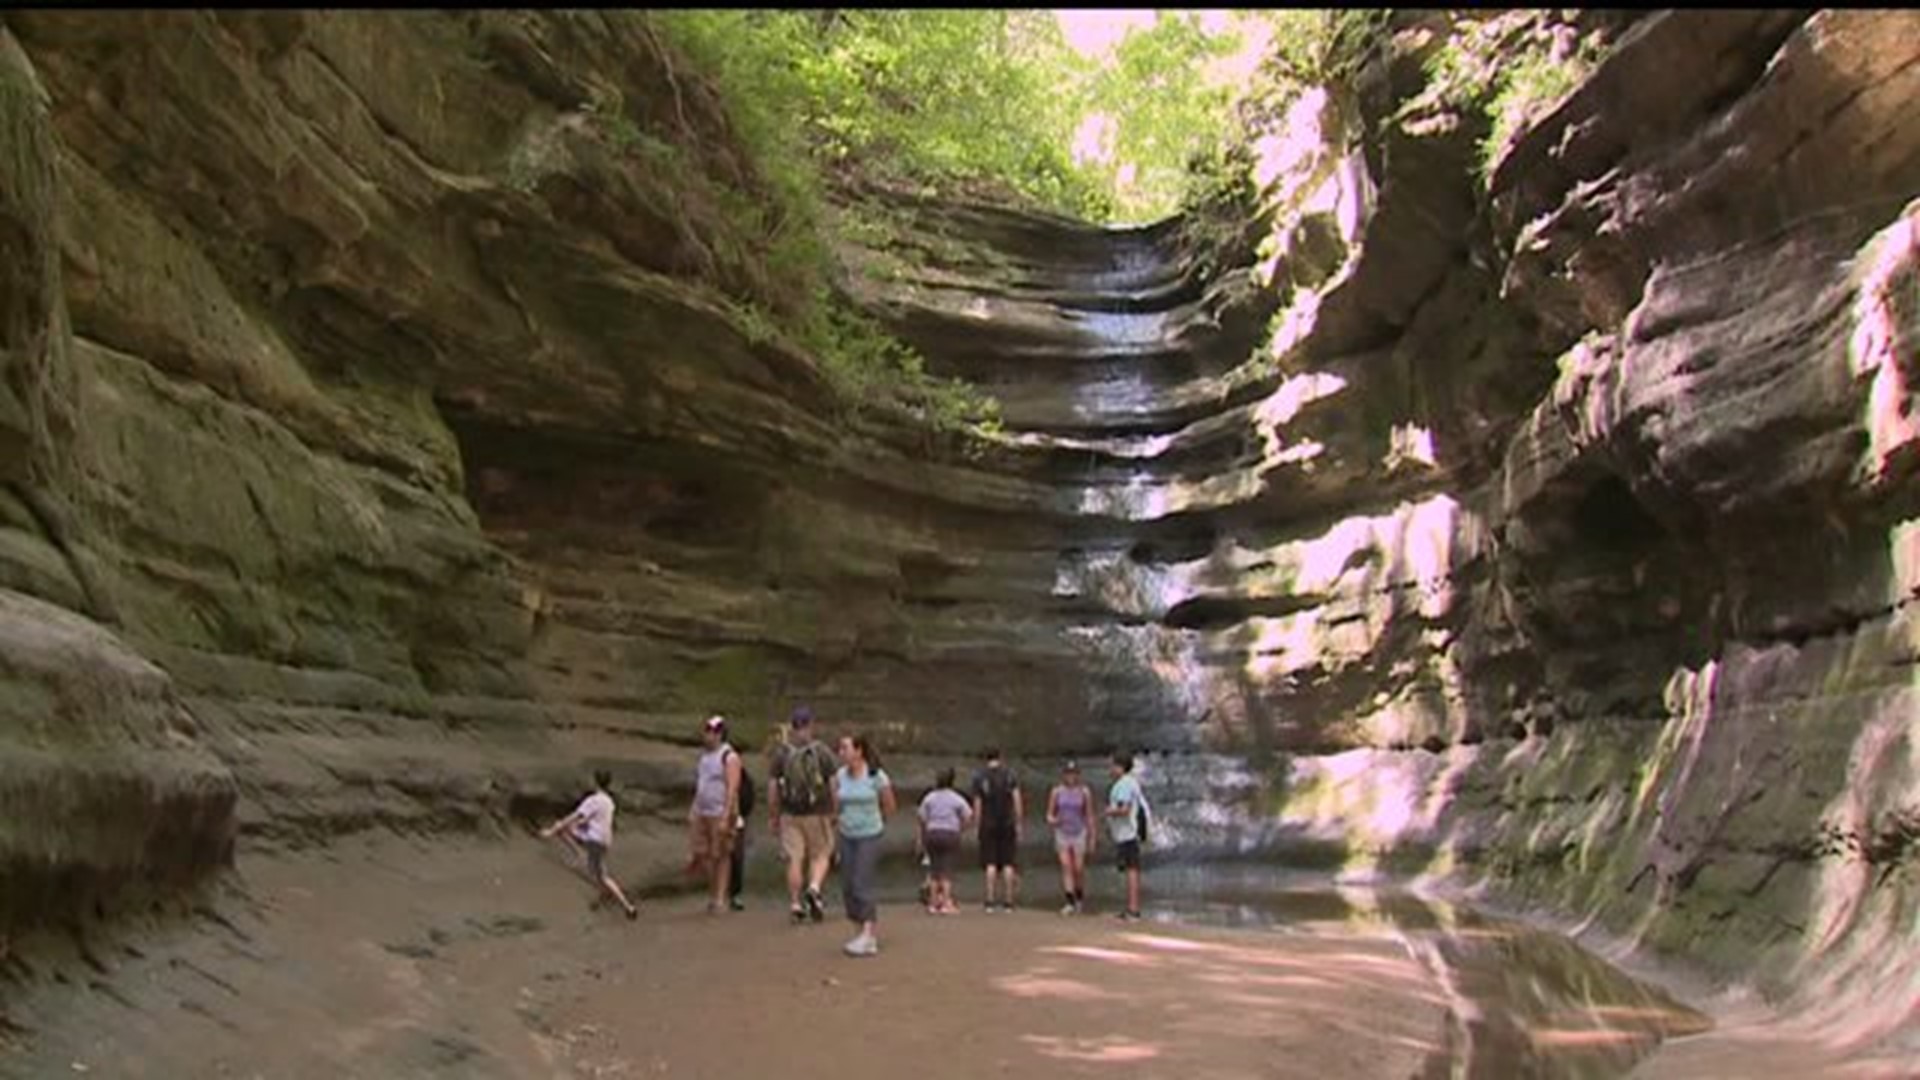 Starved Rock will be heavily traveled over July 4th weekend